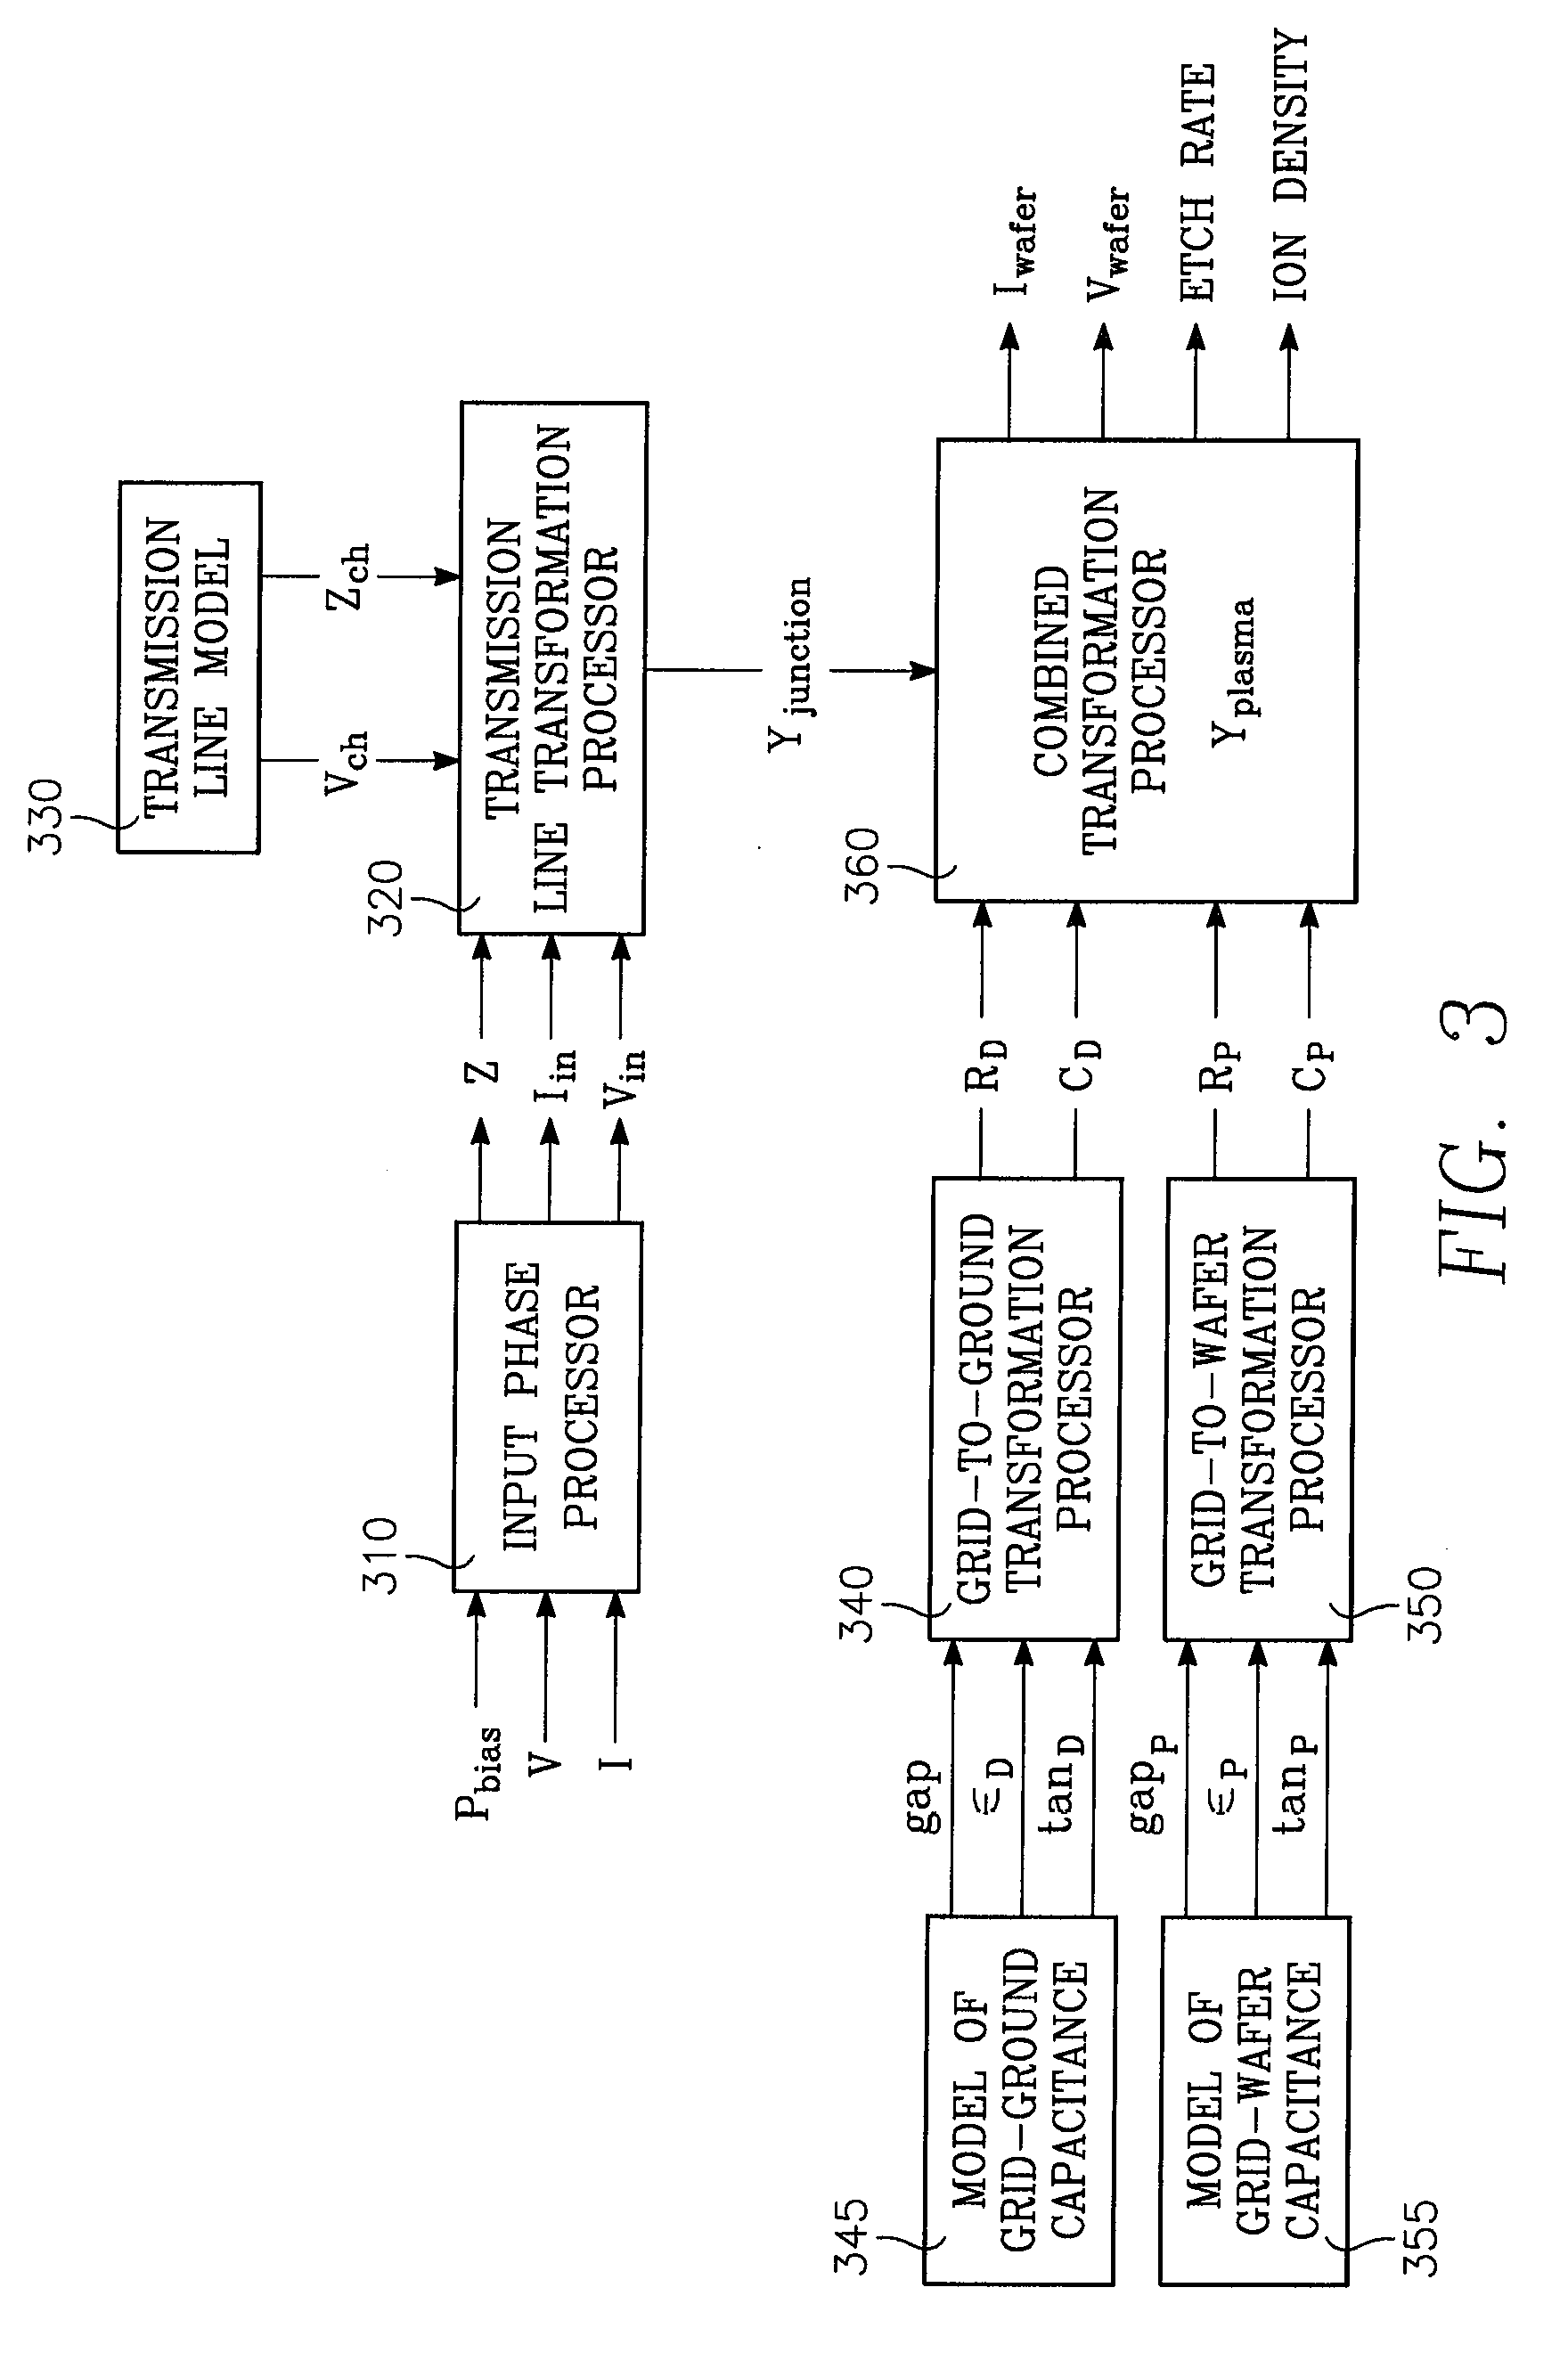 Method of controlling a chamber based upon predetermined concurrent behavior of selected plasma parameters as a function of source power, bias power and chamber pressure